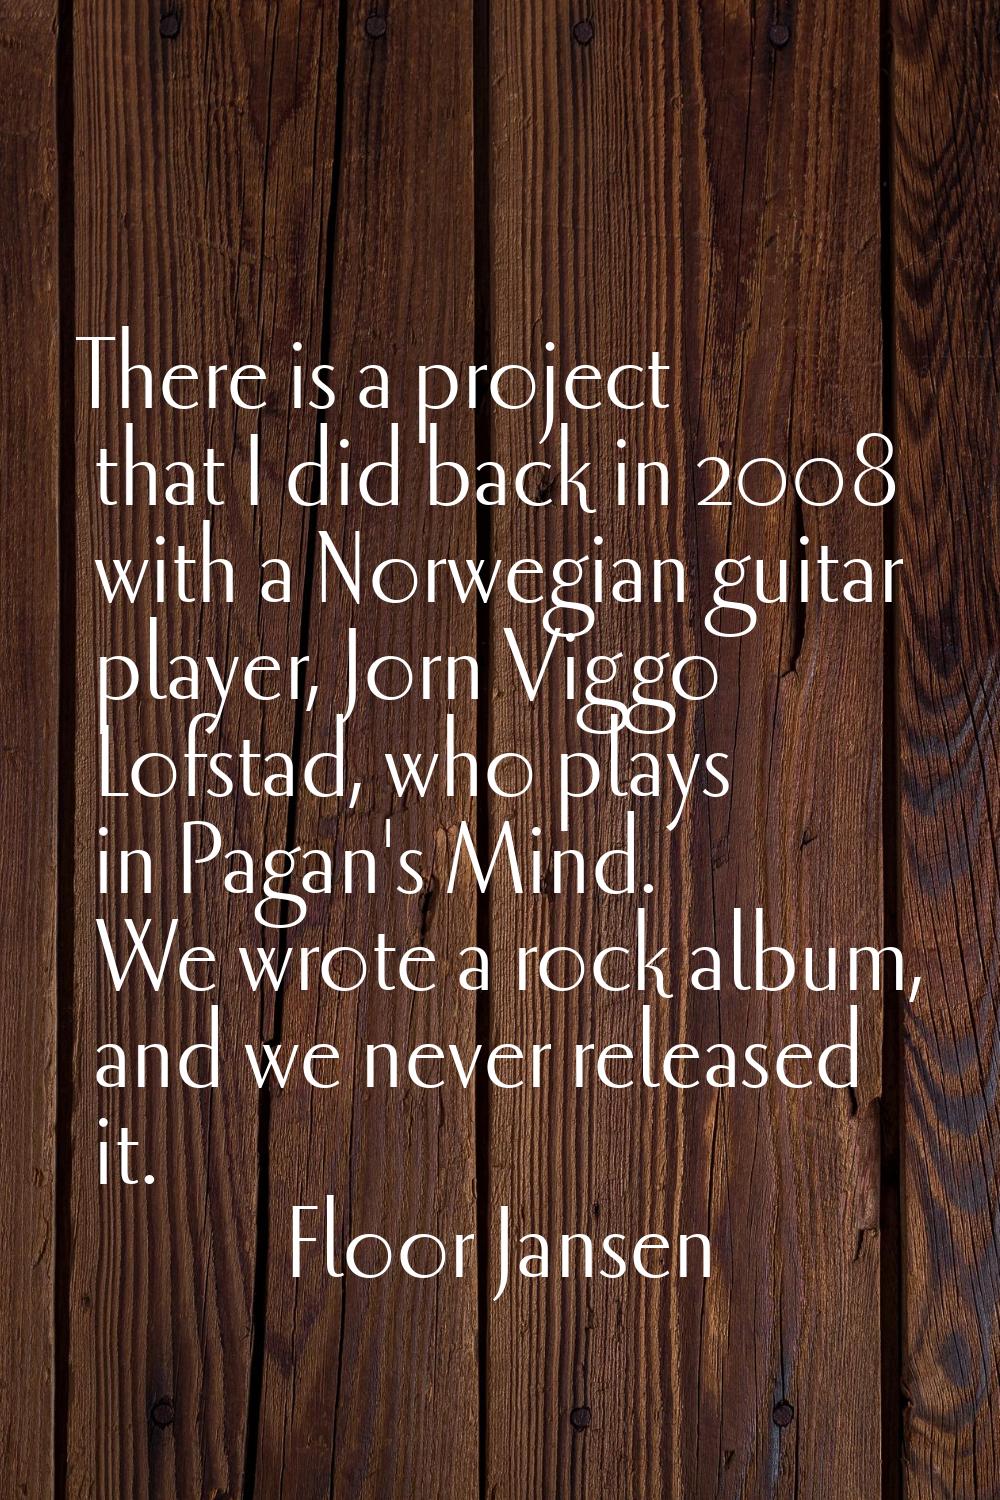 There is a project that I did back in 2008 with a Norwegian guitar player, Jorn Viggo Lofstad, who 